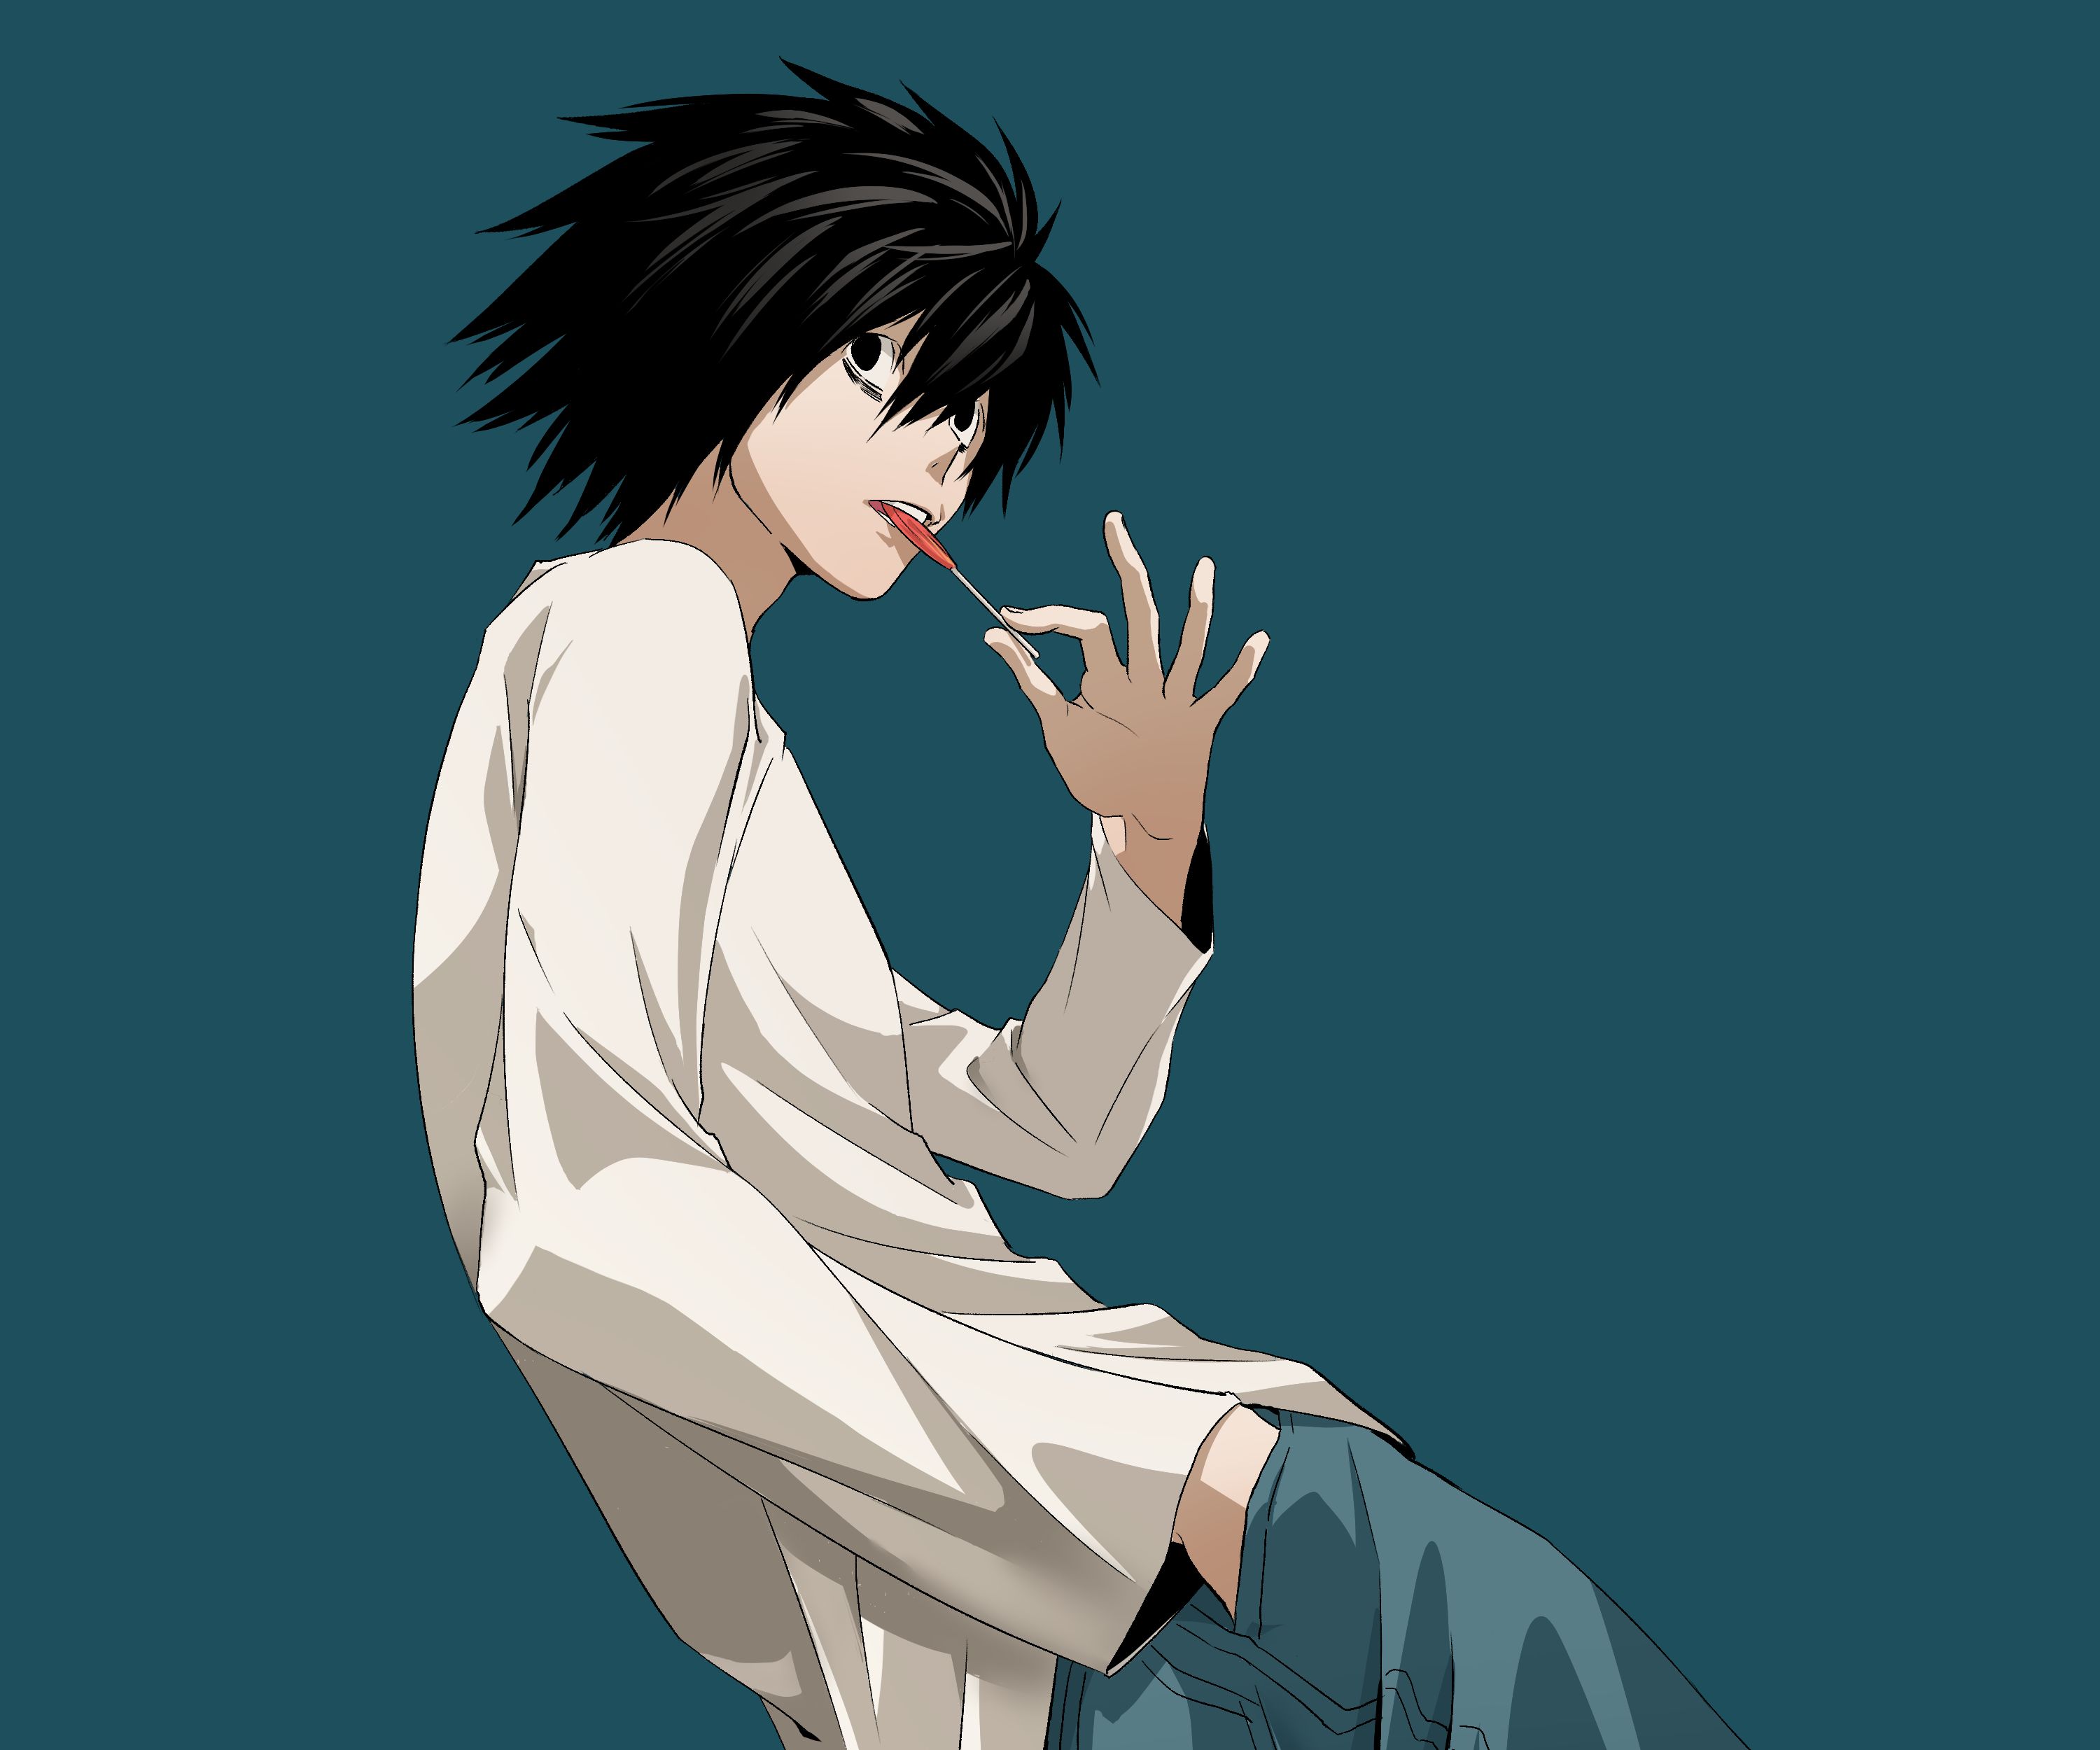 100+] Death Note L Wallpapers | Wallpapers.com